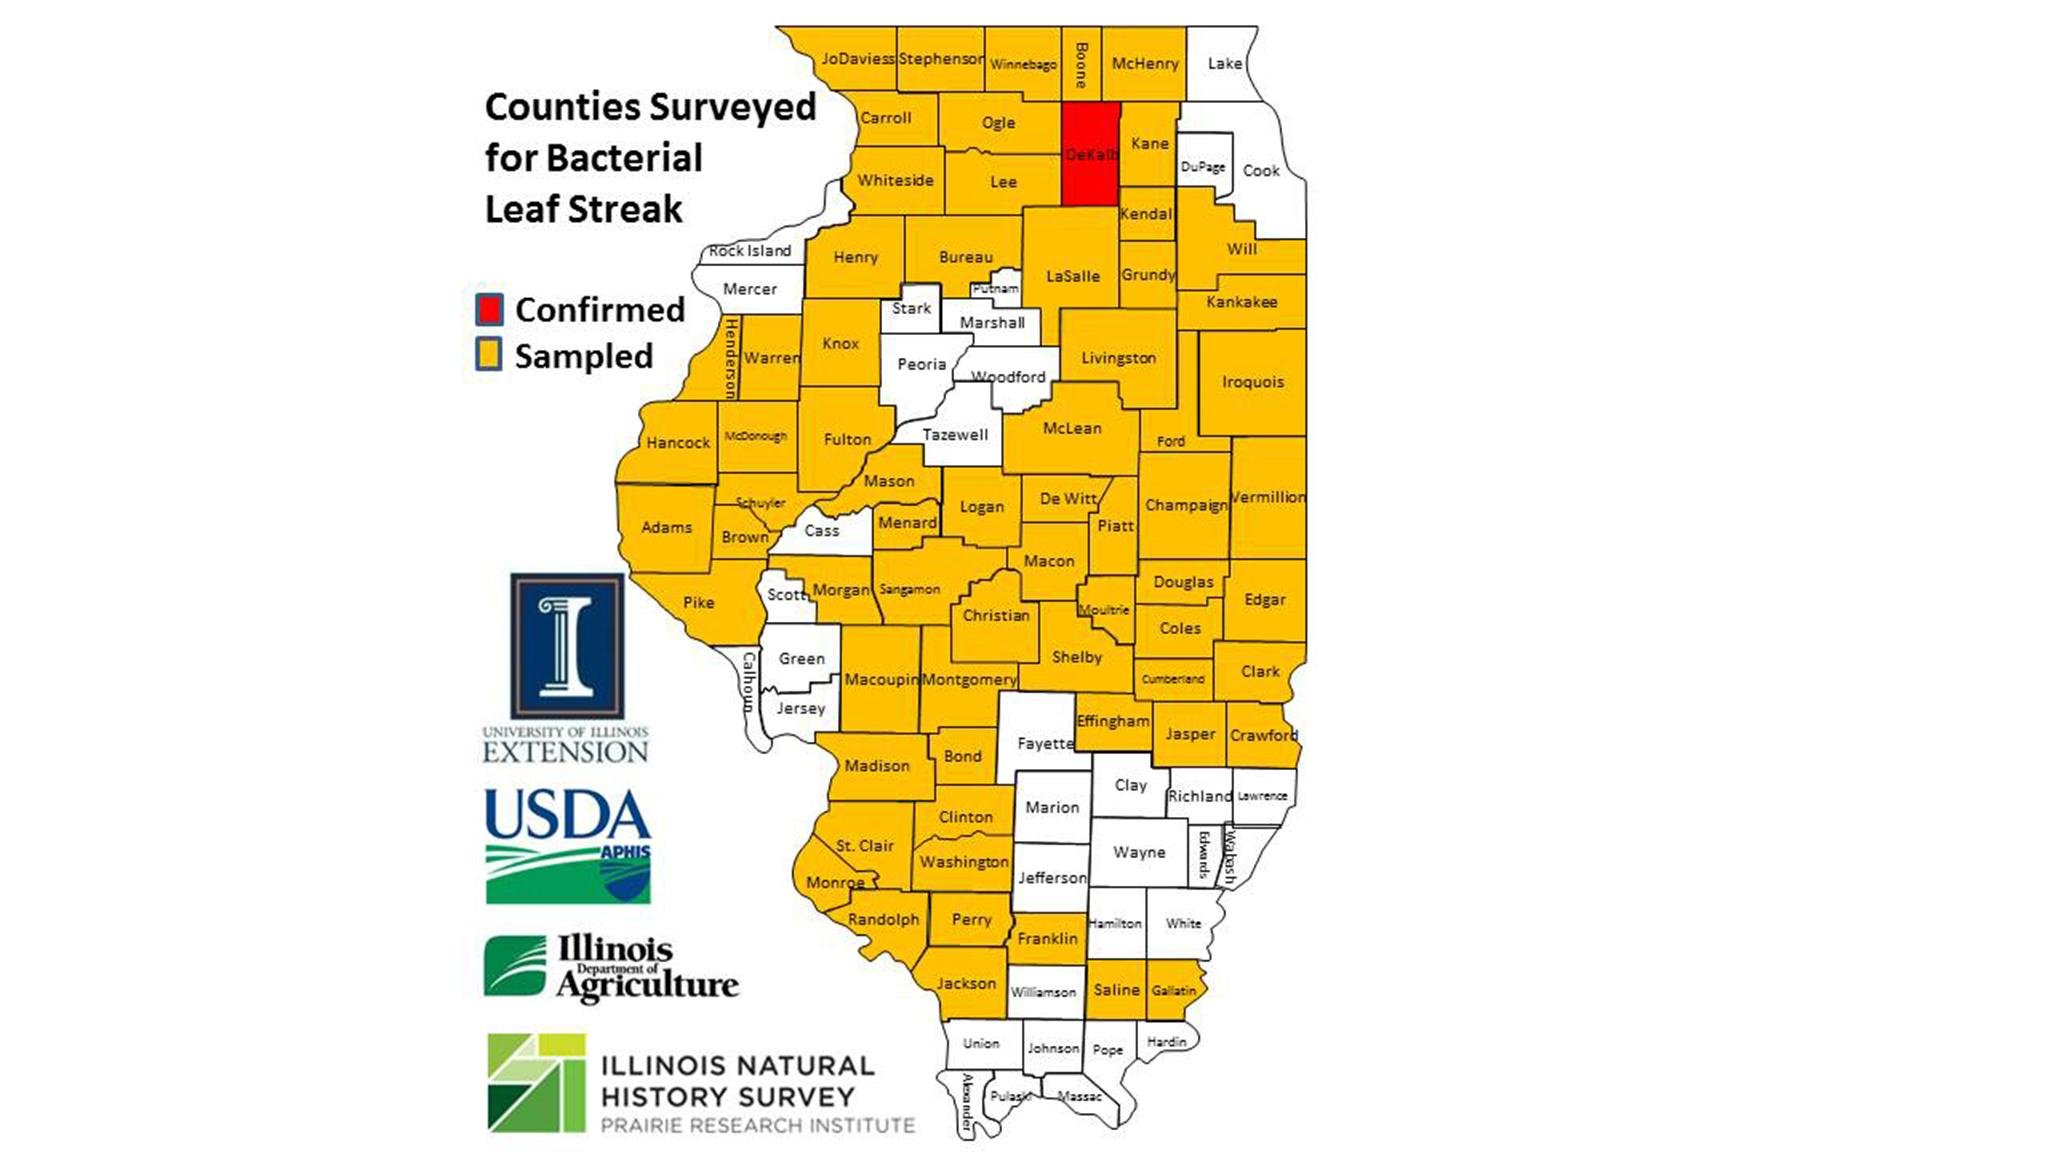 Cook County was not one of the 66 Illinois counties surveyed for bacterial leaf streak.